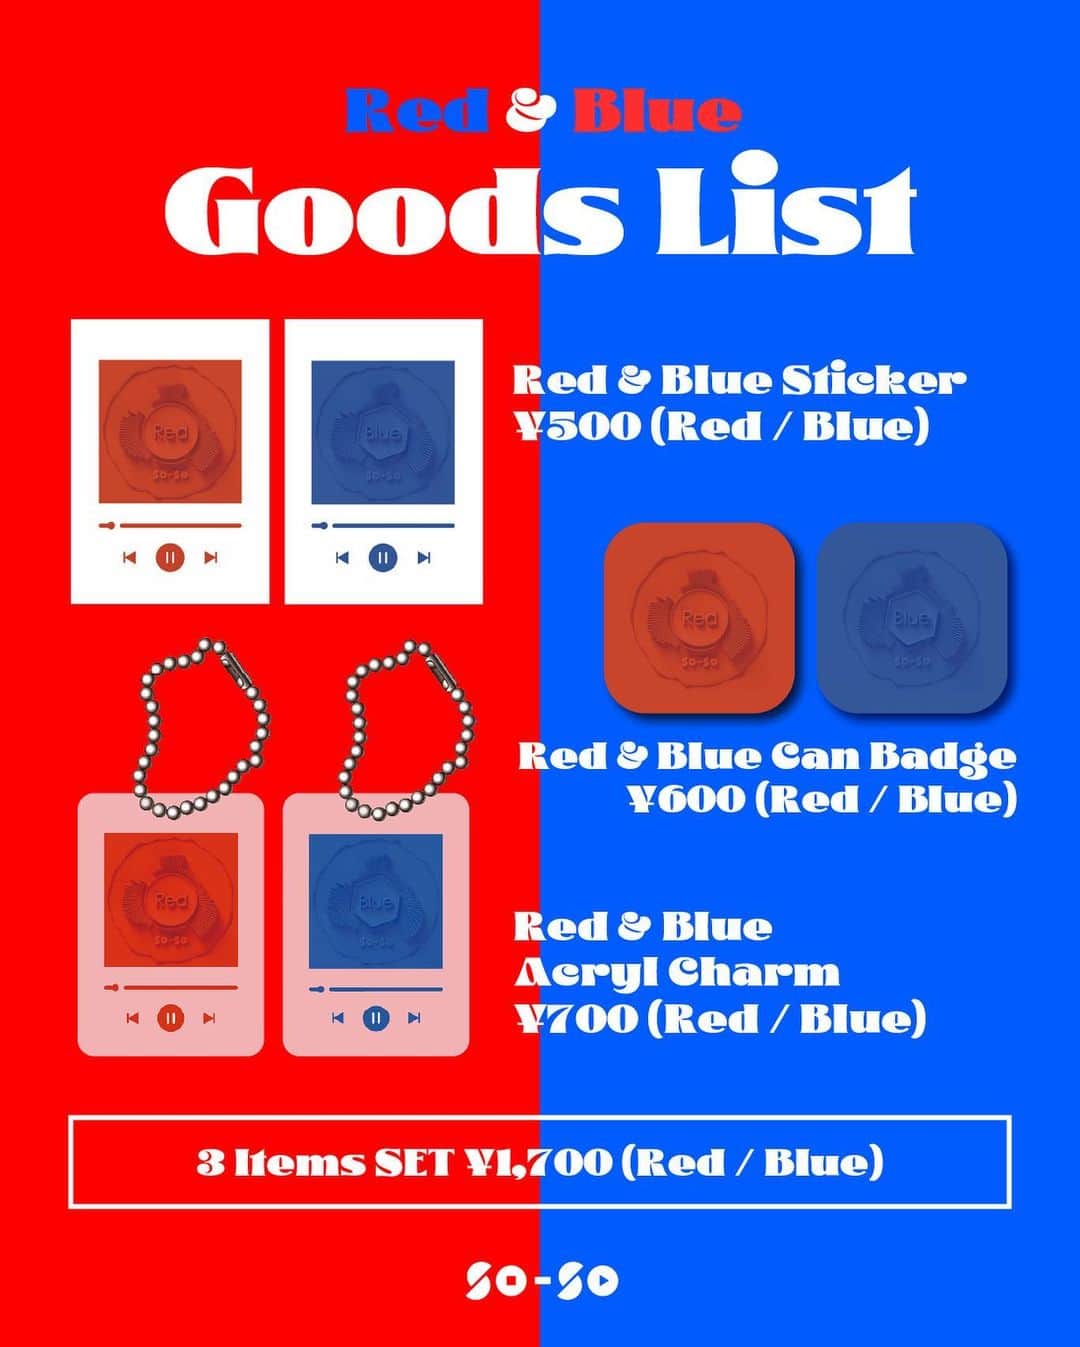 SO-SOのインスタグラム：「🔴Red & Blue GOODS🔵  9/24のリリースパーティーで販売するグッズを公開します！ 僕のお気に入りはアクリルキーホルダーです！3点セットがお得なので是非手に取って一緒に身につけましょう🔥  🔷Sticker ¥500 (Red or Blue) 🔷Button Badge (缶バッジ) ¥600 (Red or Blue) 🔷Acryl Charm ¥700 (Red or Blue)  🍅3Items Set ¥1,700 (Red or Blue)  支払い方法: 現金/クレジットカード/電子マネー/PayPay  SO-SO Color EP Release Party  "Red & Blue" 2023.9.24(日) at 下北沢ADRIFT OPEN/START 17:00/18:00」